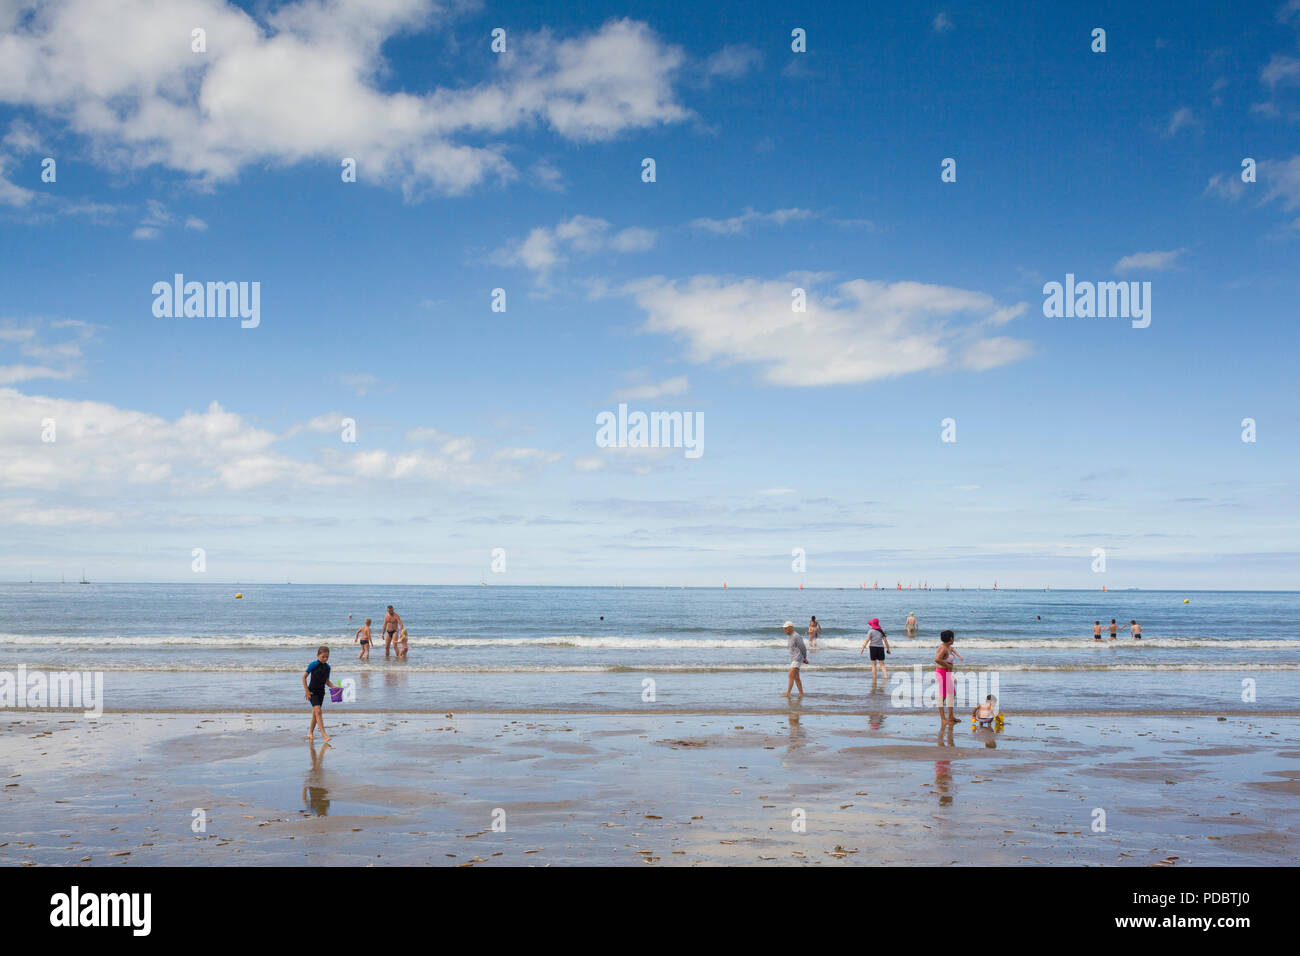 Holidaymakers on the shoreline of the expansive sandy beach at Deauville, Normandy, France with sailing boats on the horizon Stock Photo